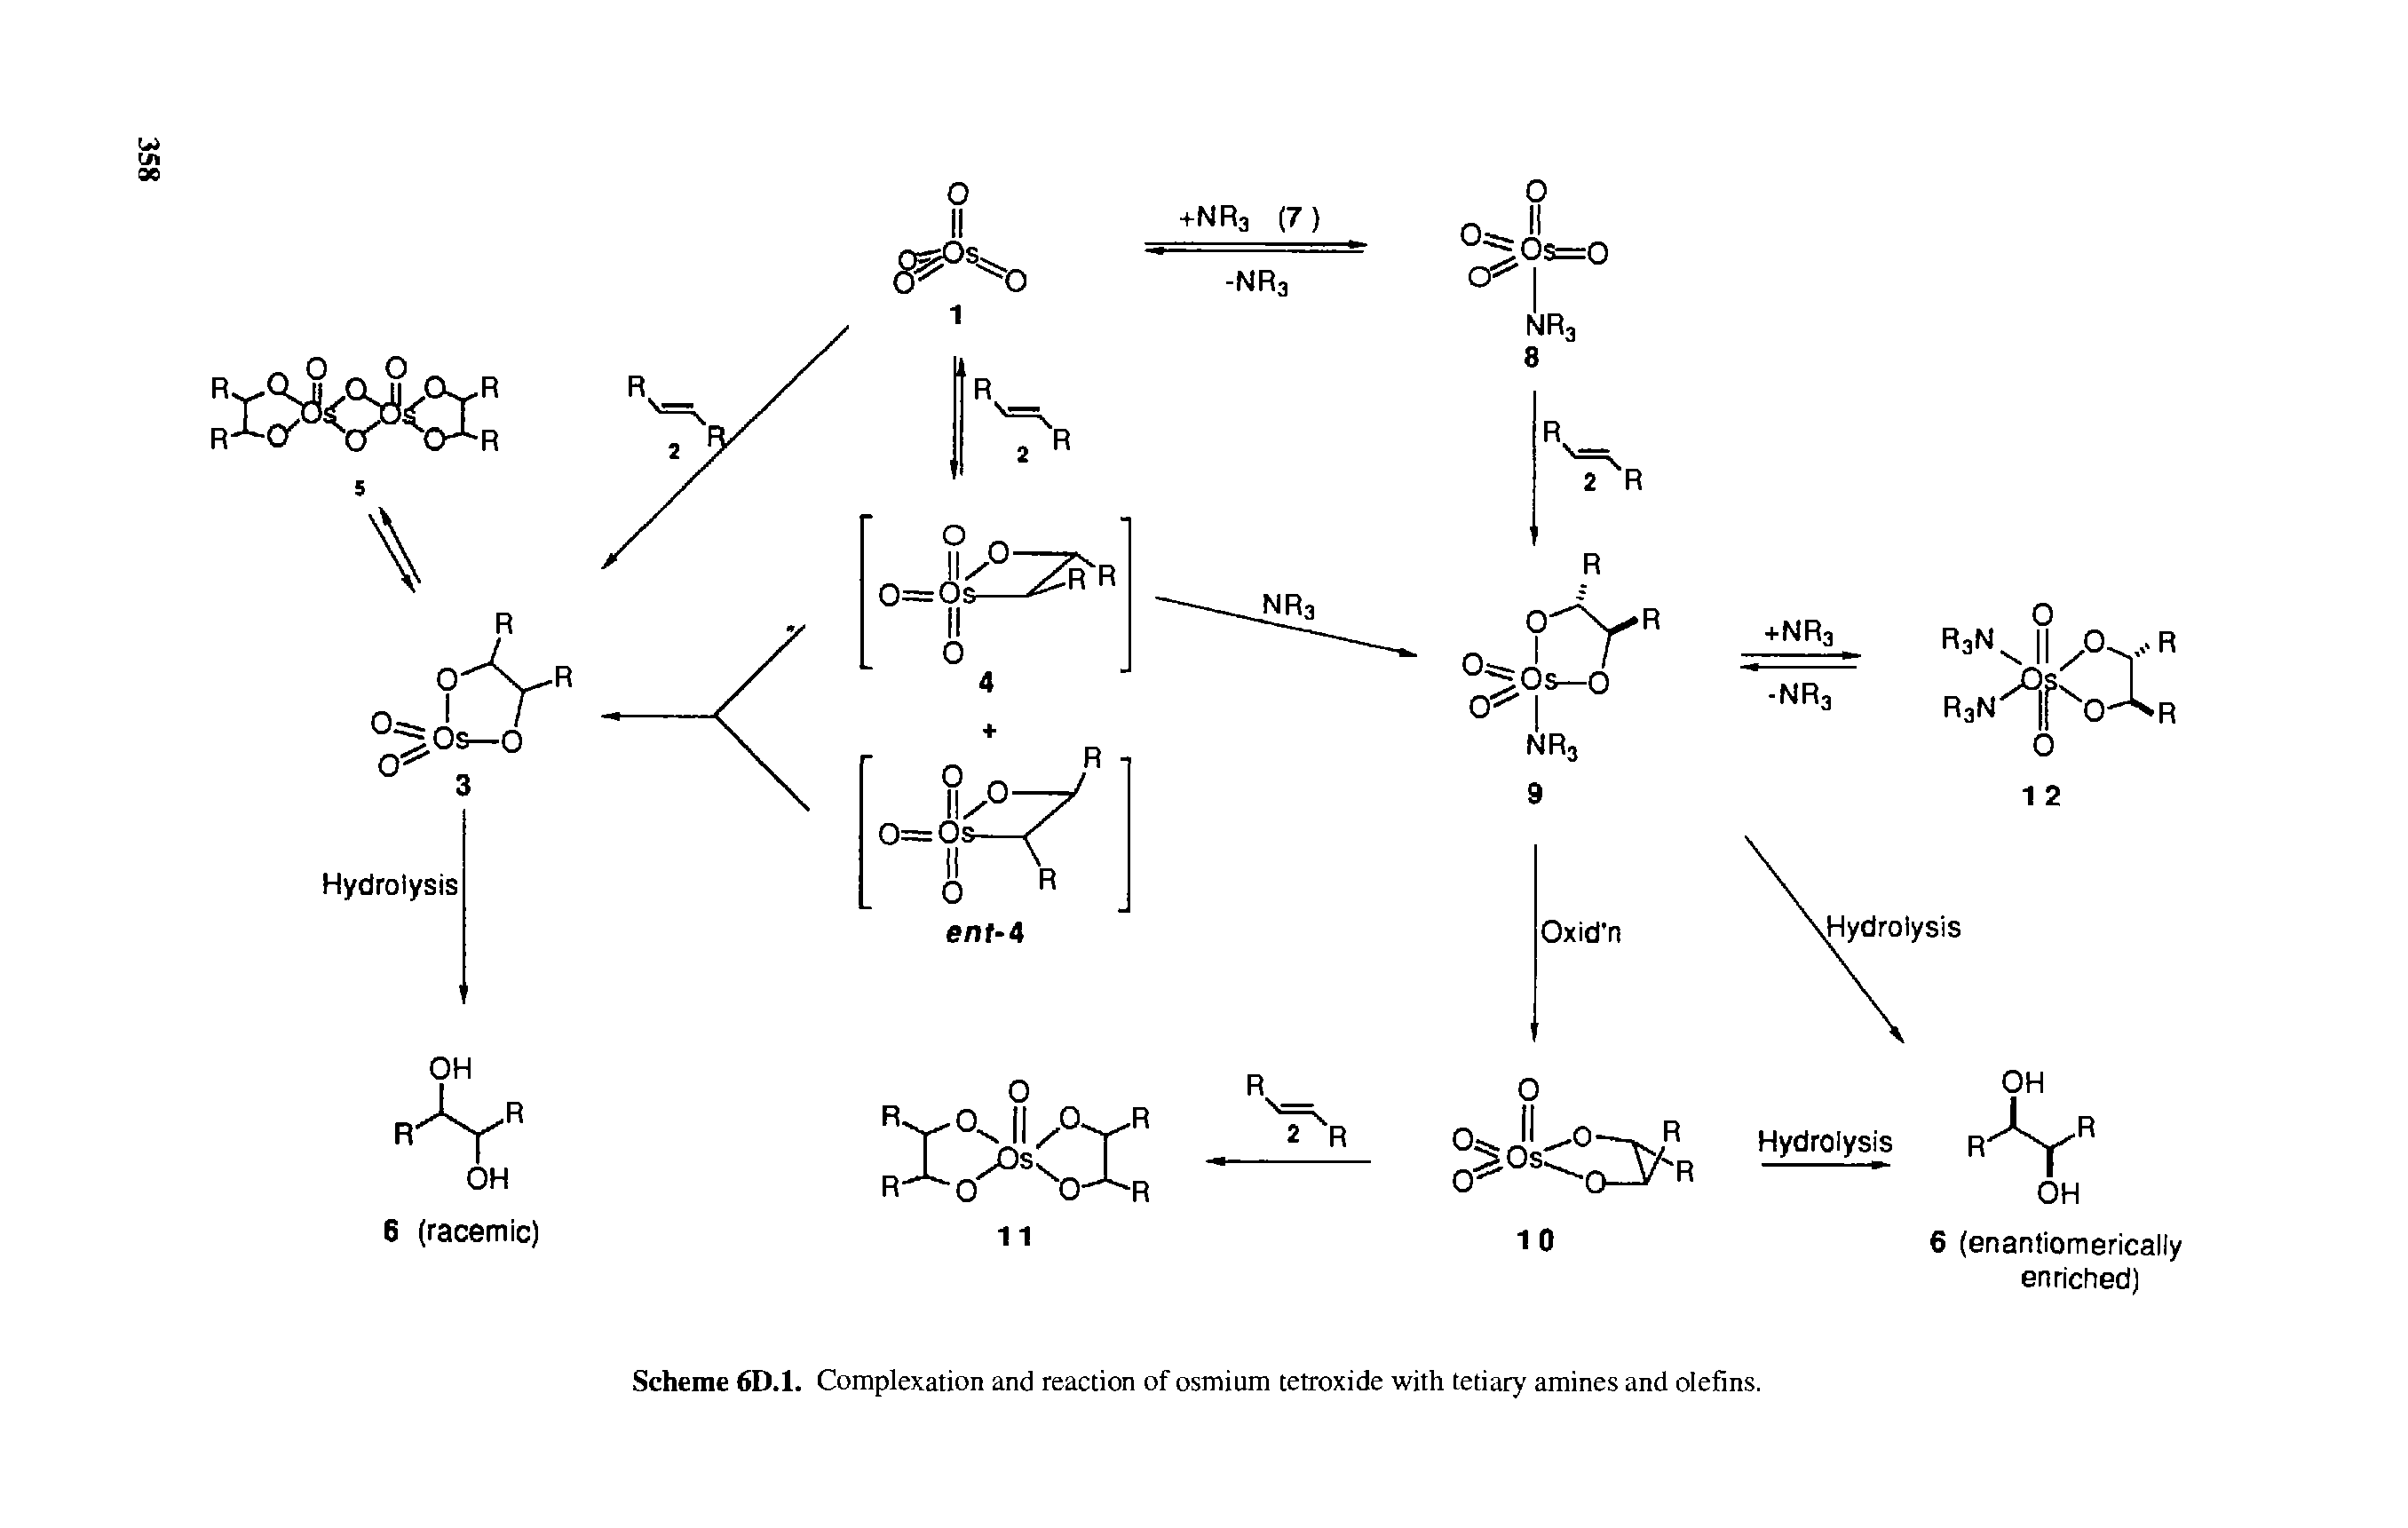 Scheme 6D.1. Complexation and reaction of osmium tetroxide with tetiary amines and olefins.